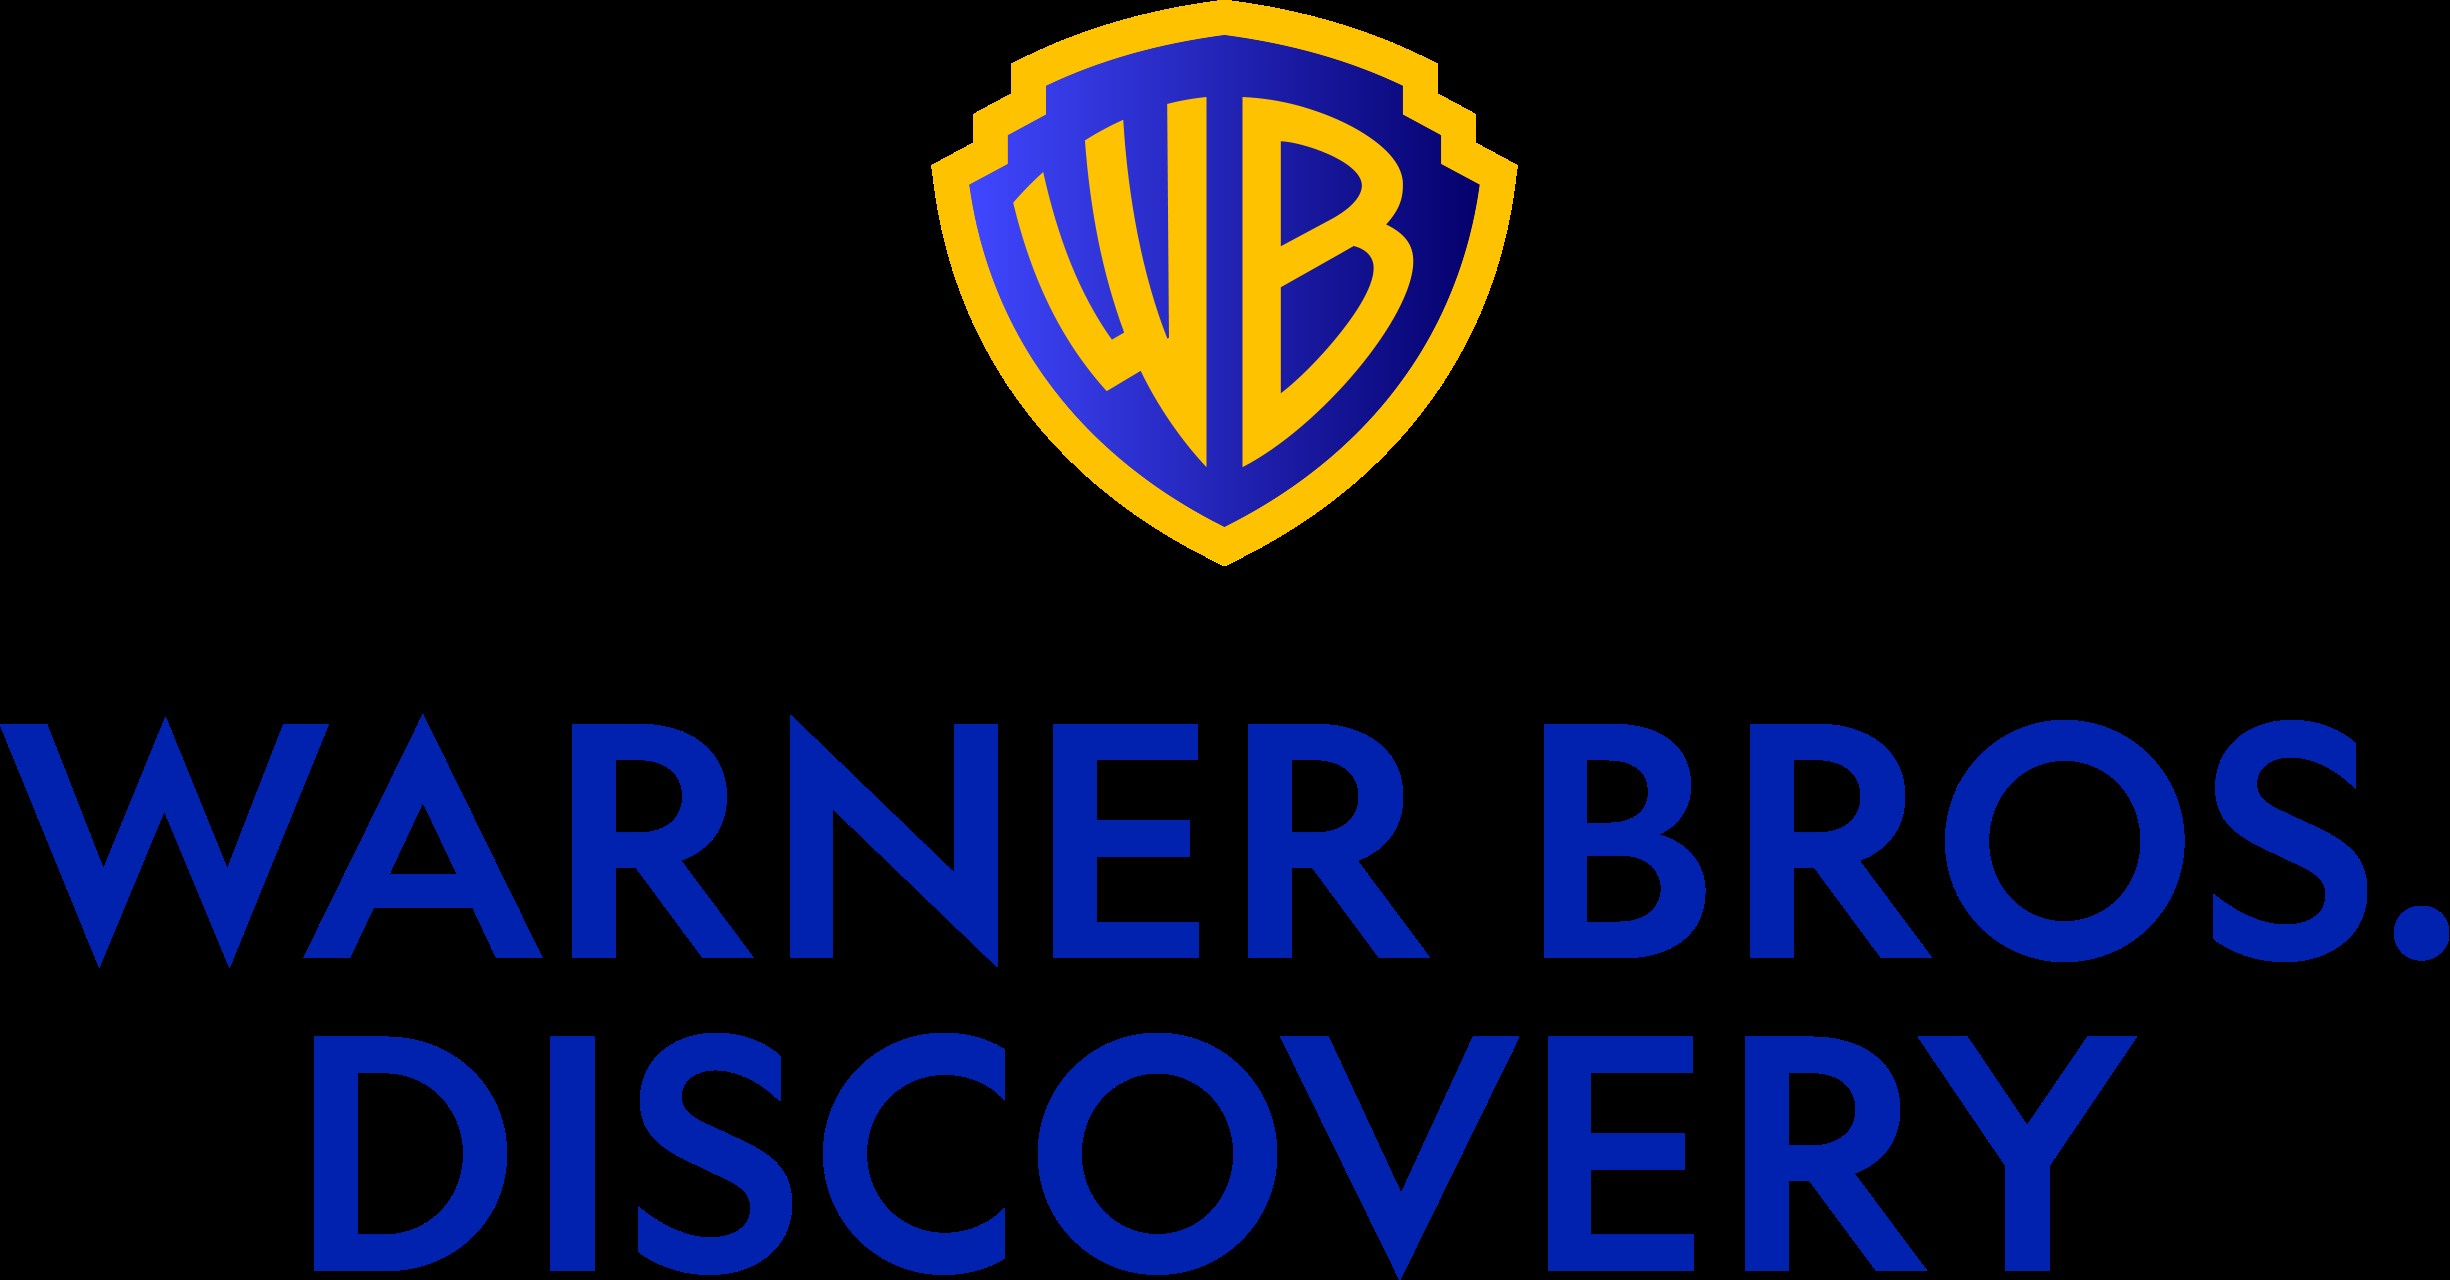 VideoAmp and Warner Bros. Discovery Announce Audience Measurement